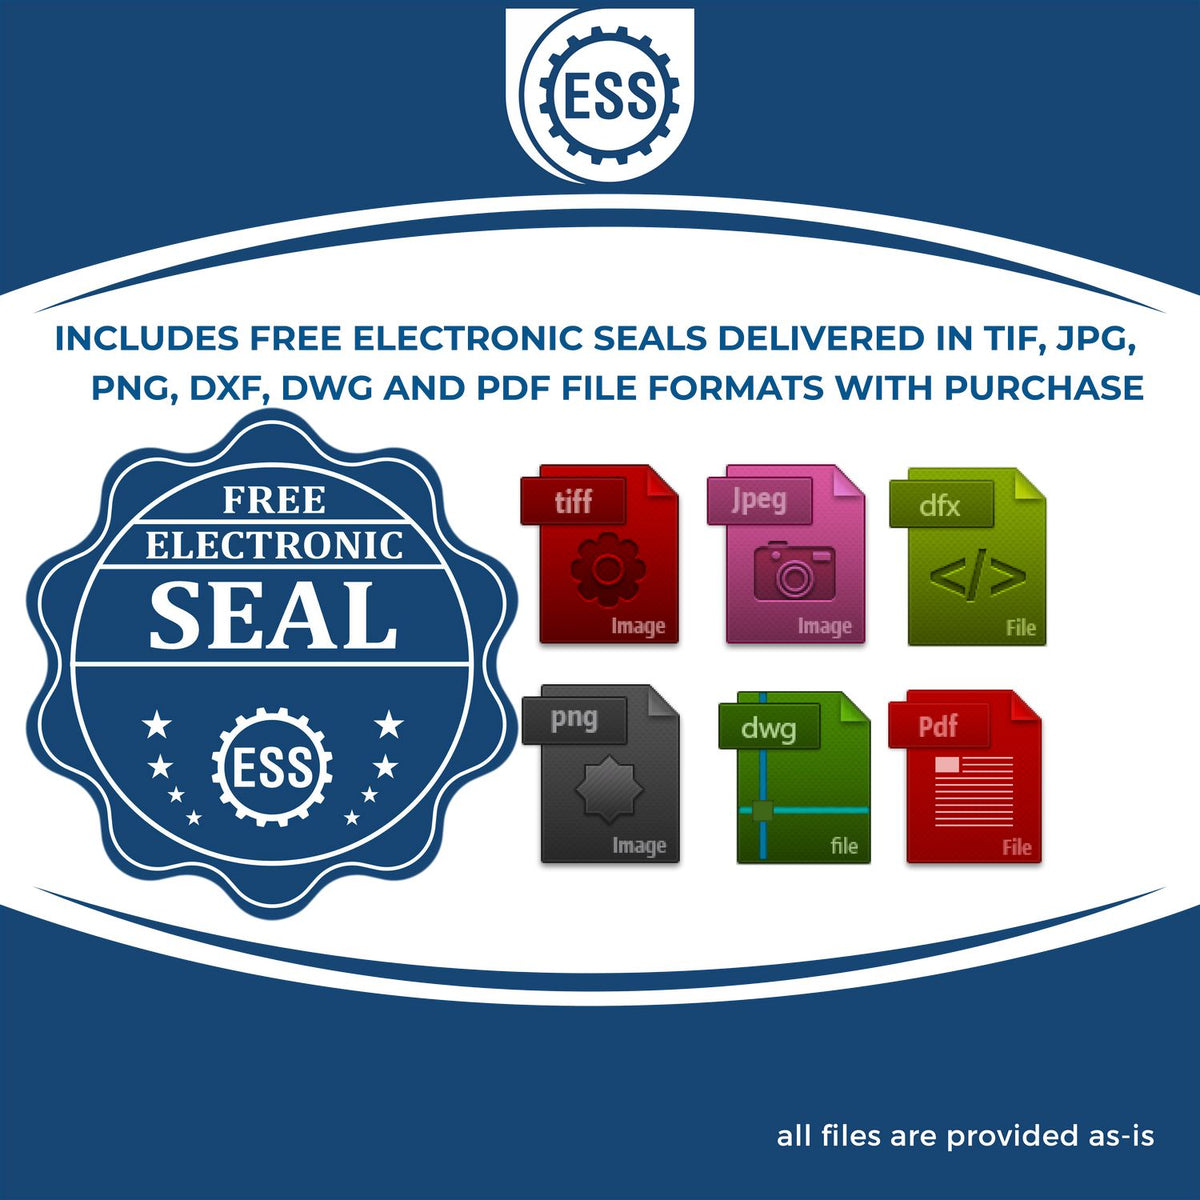 An infographic for the free electronic seal for the Heavy-Duty New York Rectangular Notary Stamp illustrating the different file type icons such as DXF, DWG, TIF, JPG and PNG.